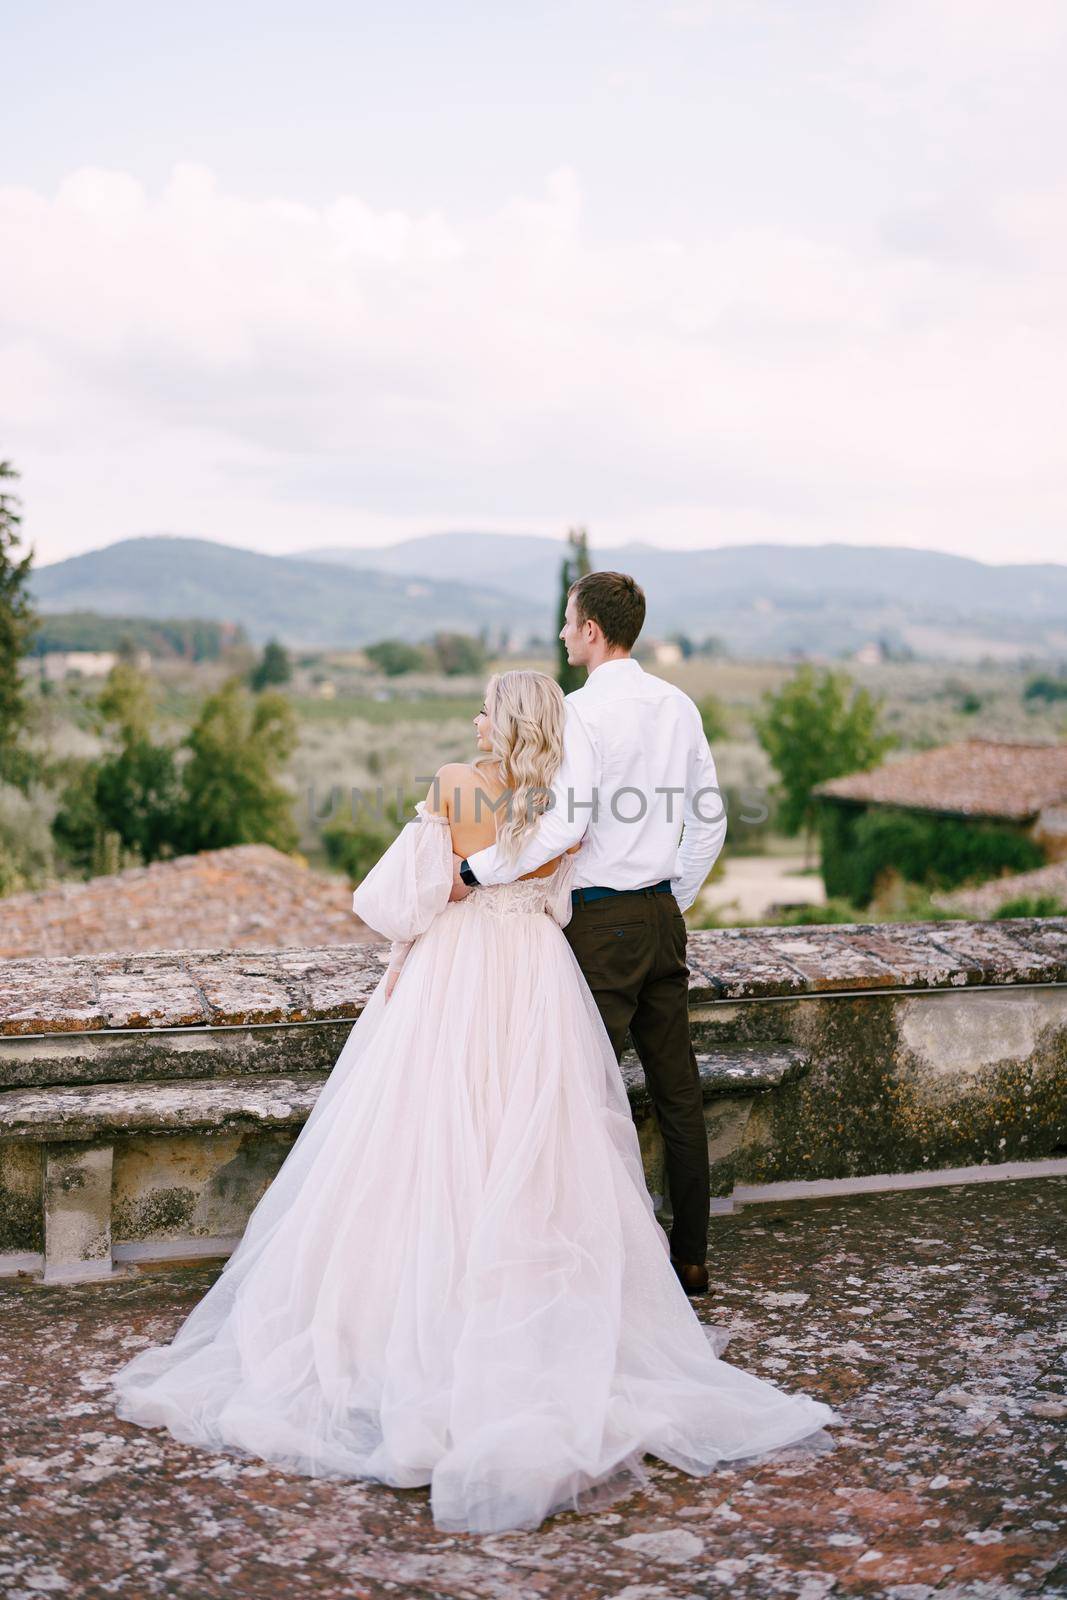 Wedding at an old winery villa in Tuscany, Italy. A wedding couple stands on the roof of an old winery, cuddles, stands with his back to the frame. by Nadtochiy